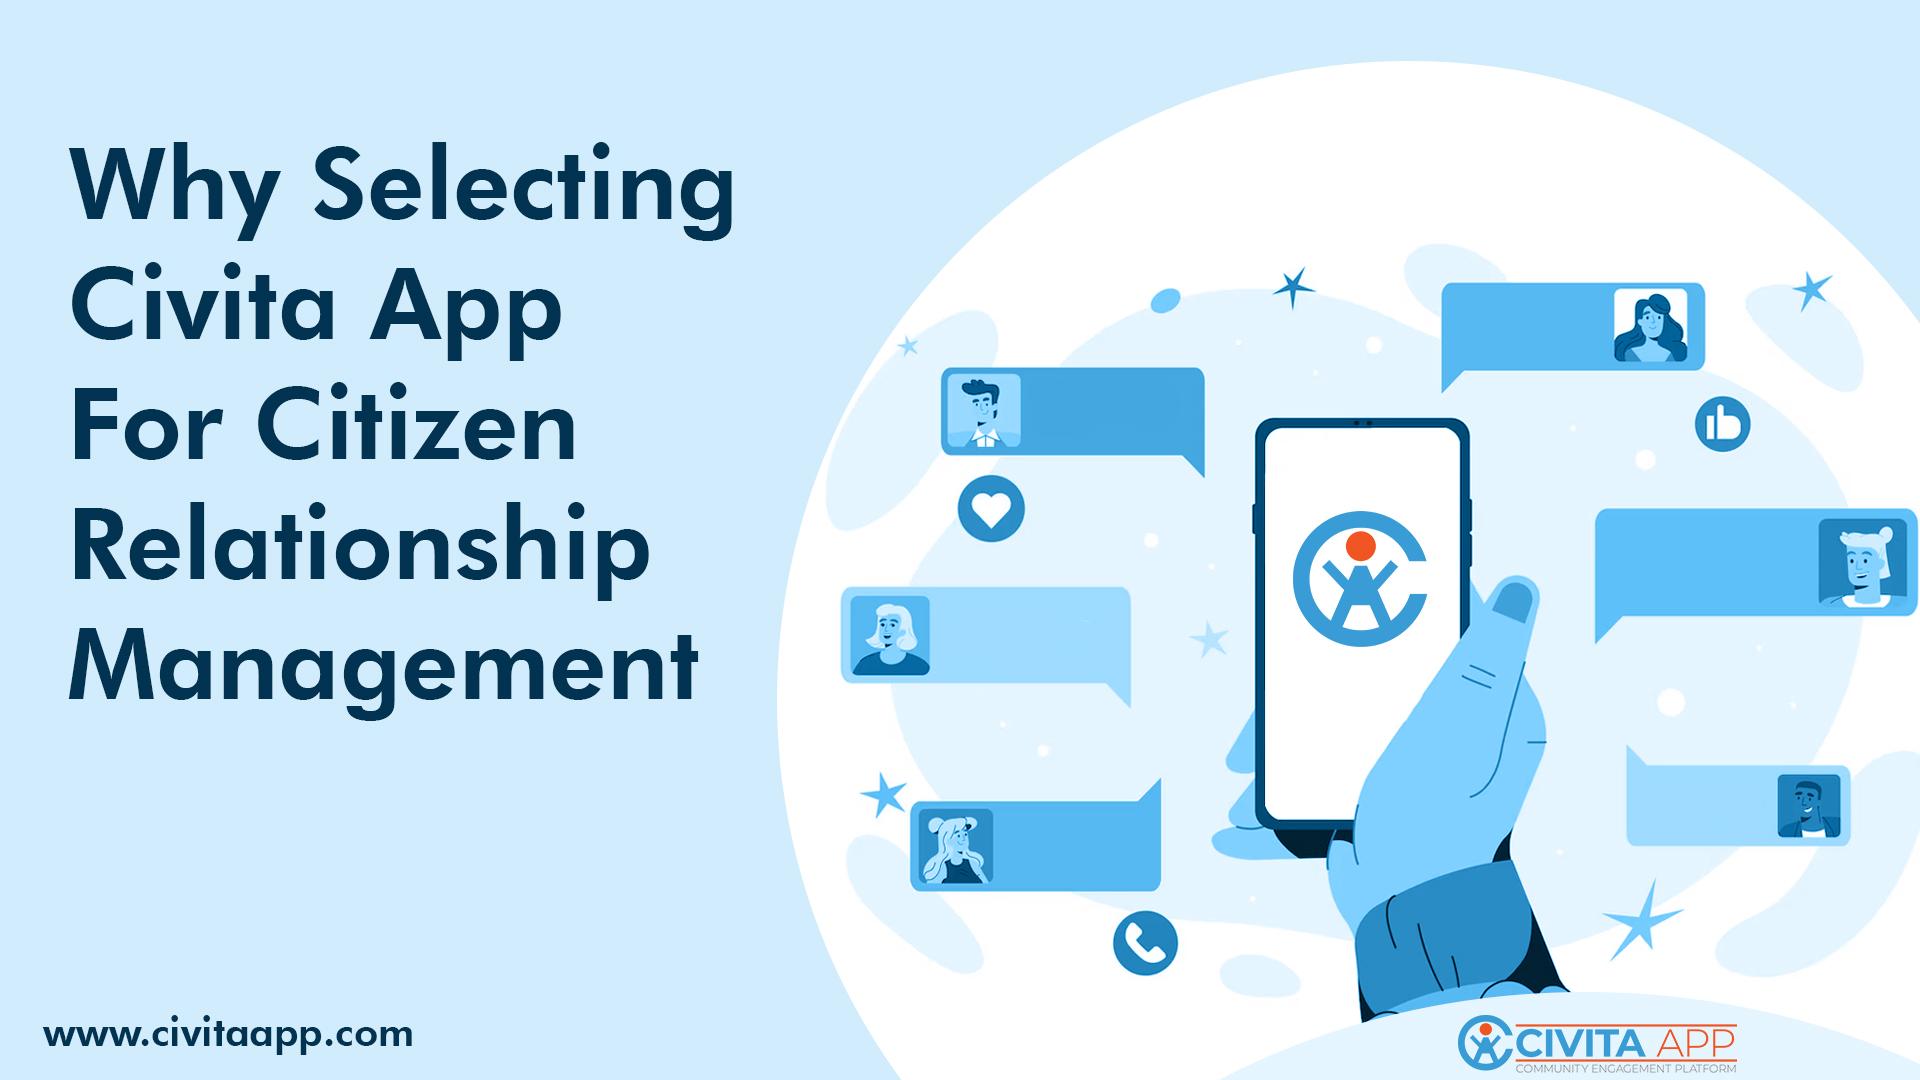 Our Choice and Why Selecting Civita App for Citizen Relationship Management - Civita App